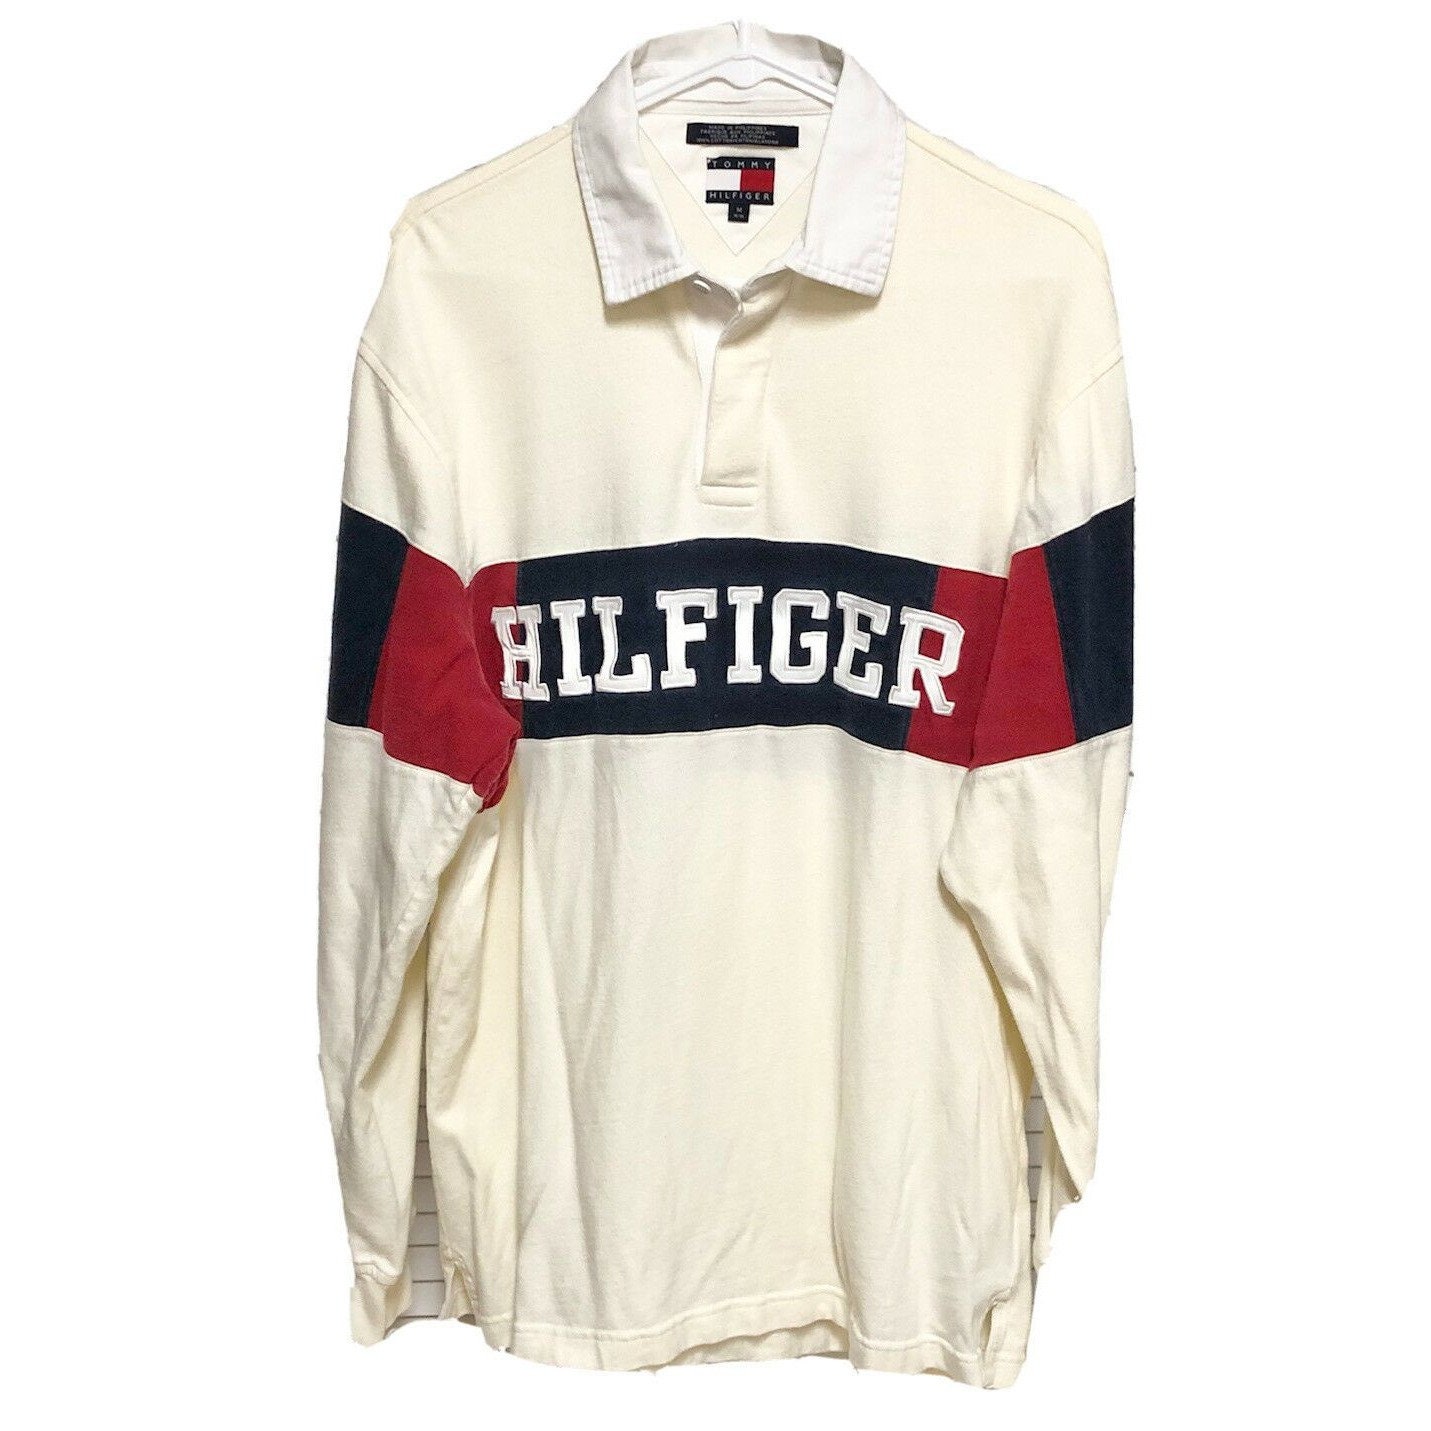 selvbiografi kontakt pille Mens Tommy Hilfiger Rugby Polo Spell Out Long Sleeve USA SIZE - Etsy